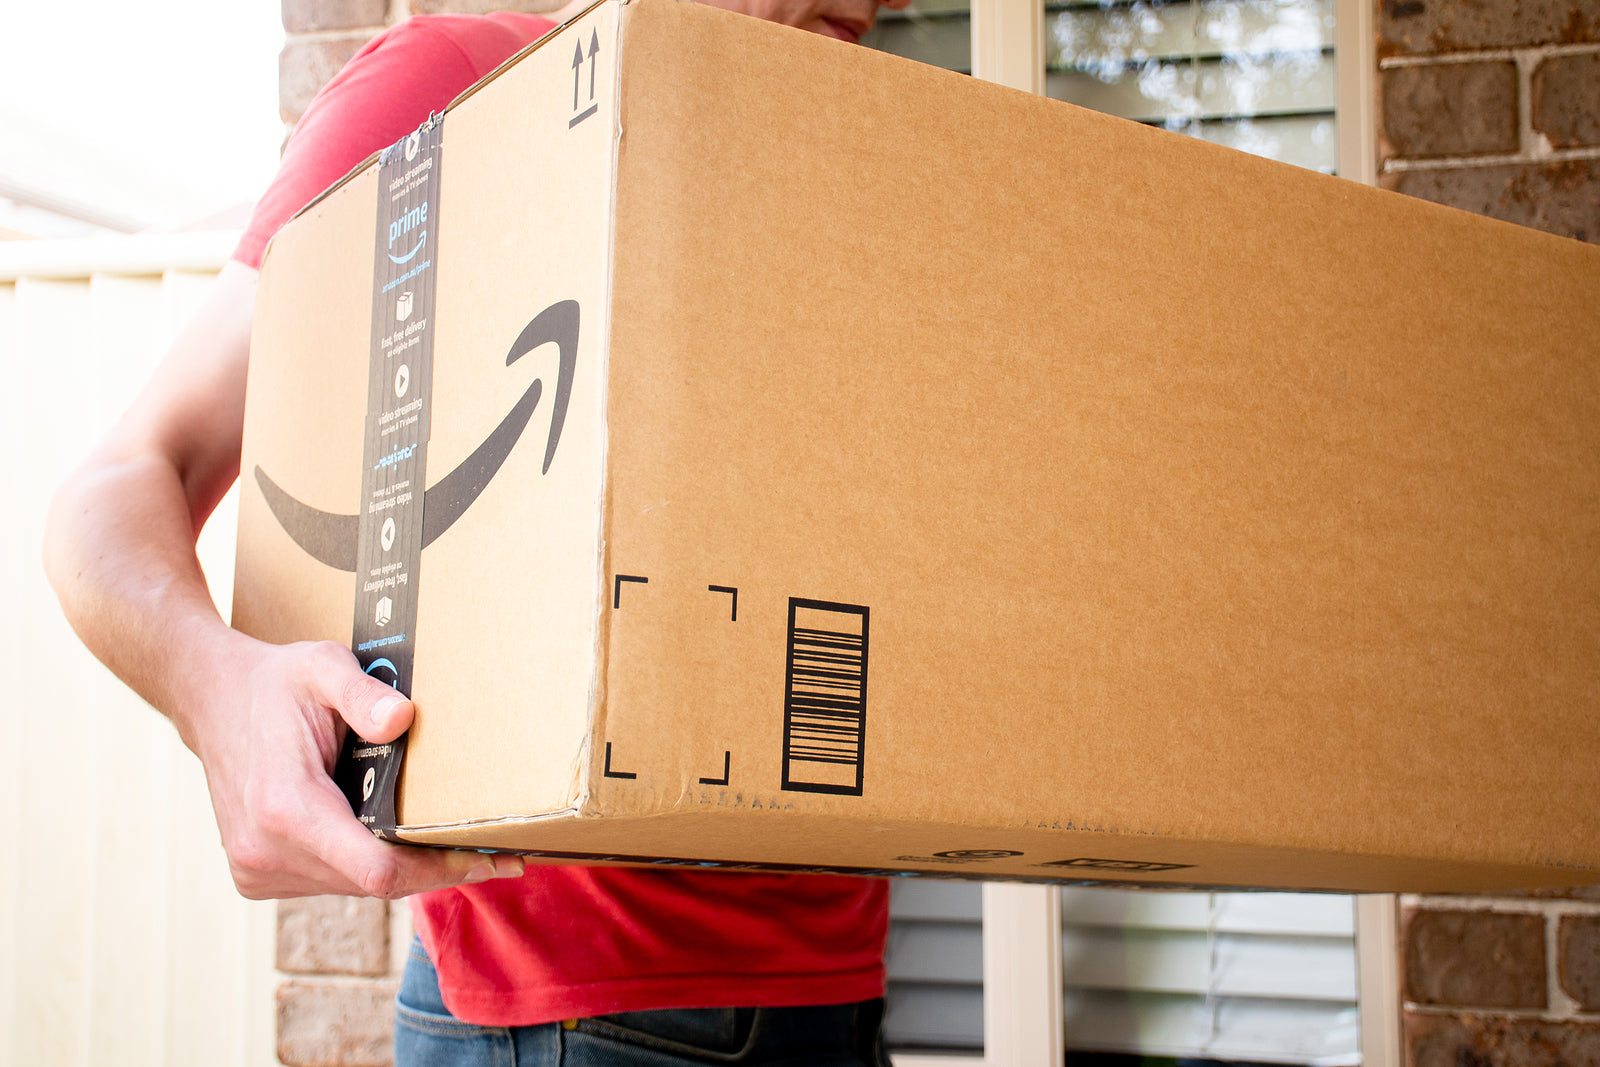 [US] No delivery fees for Amazon Flex in Seattle despite peer rises